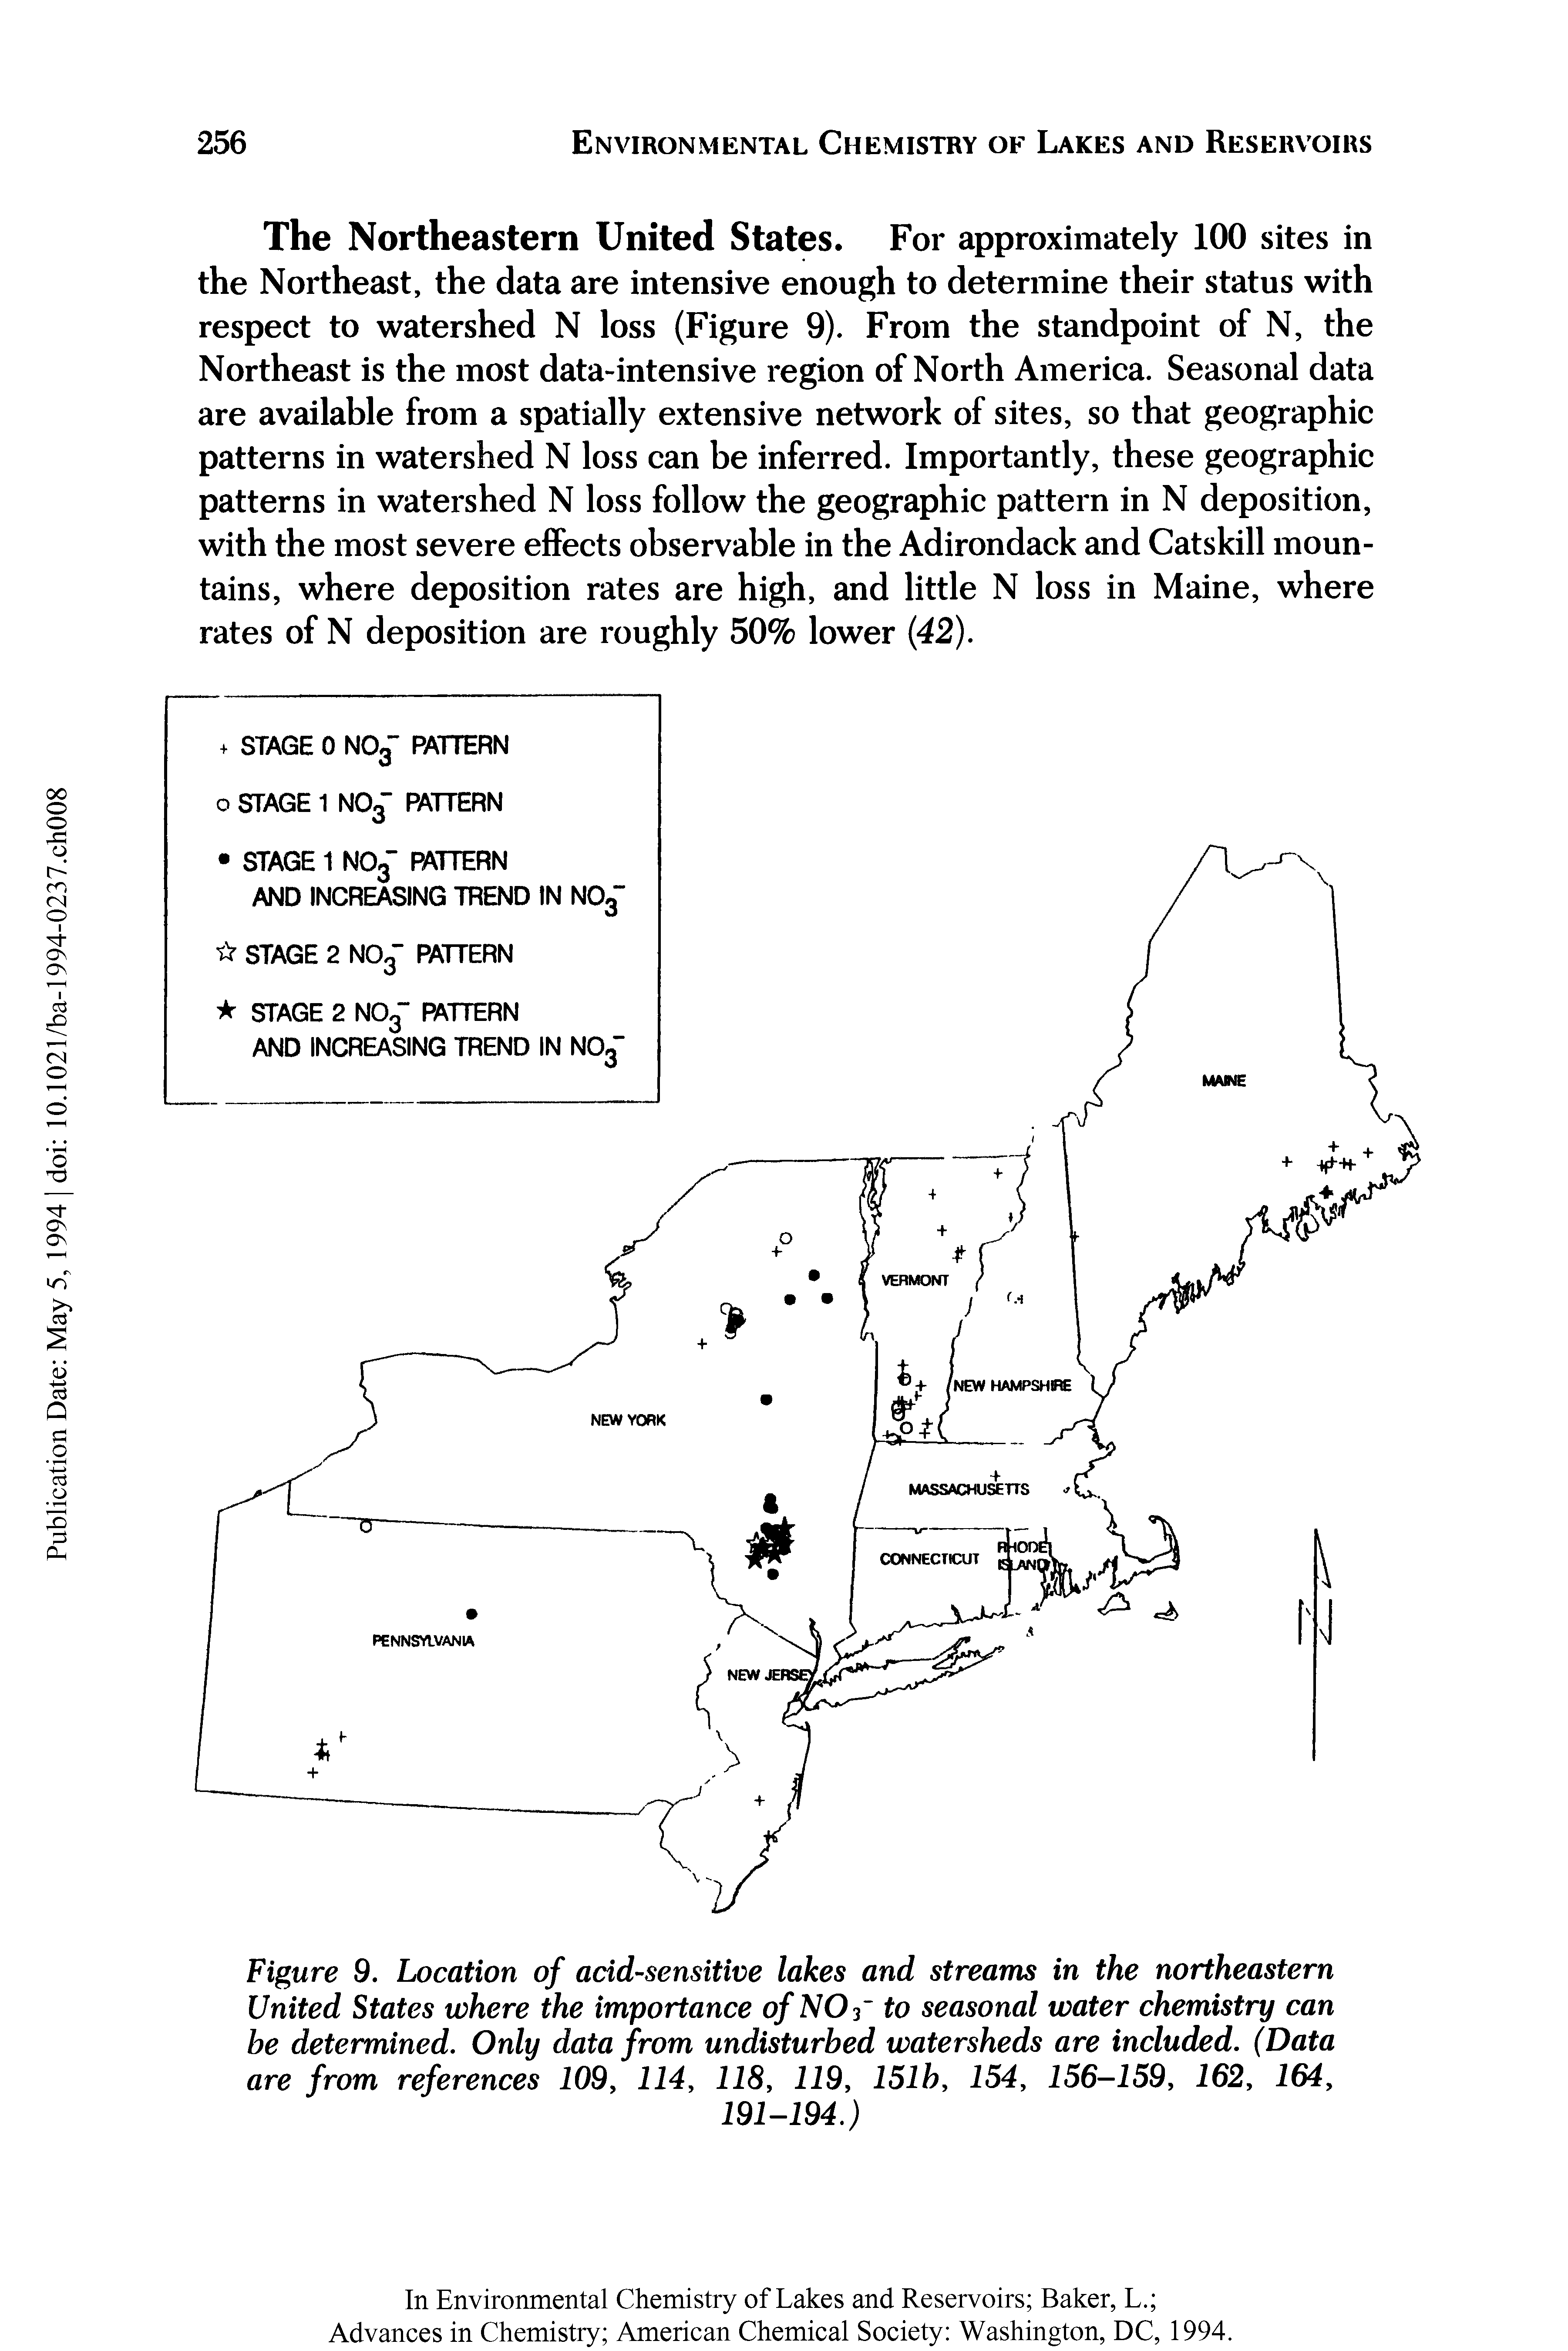 Figure 9. Location of acid-sensitive lakes and streams in the northeastern United States where the importance of NO 3 to seasonal water chemistry can be determined. Only data from undisturbed watersheds are included. (Data are from references 109, 114, 118, 119, 151b, 154, 156-159, 162, 164,...